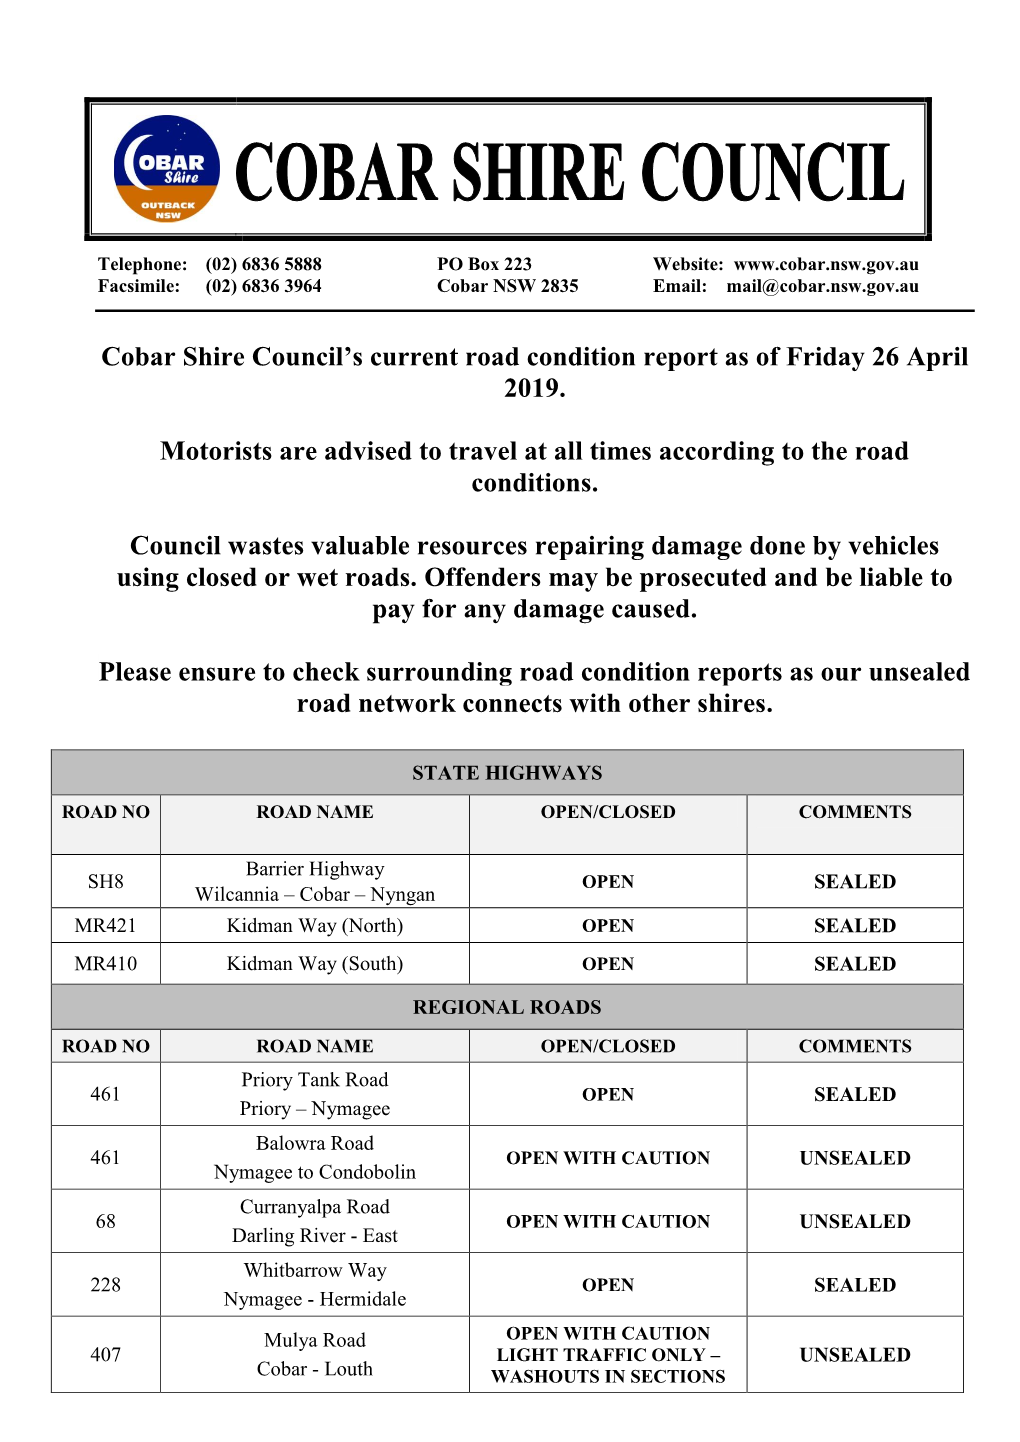 Cobar Shire Council's Current Road Condition Report As of Friday 26